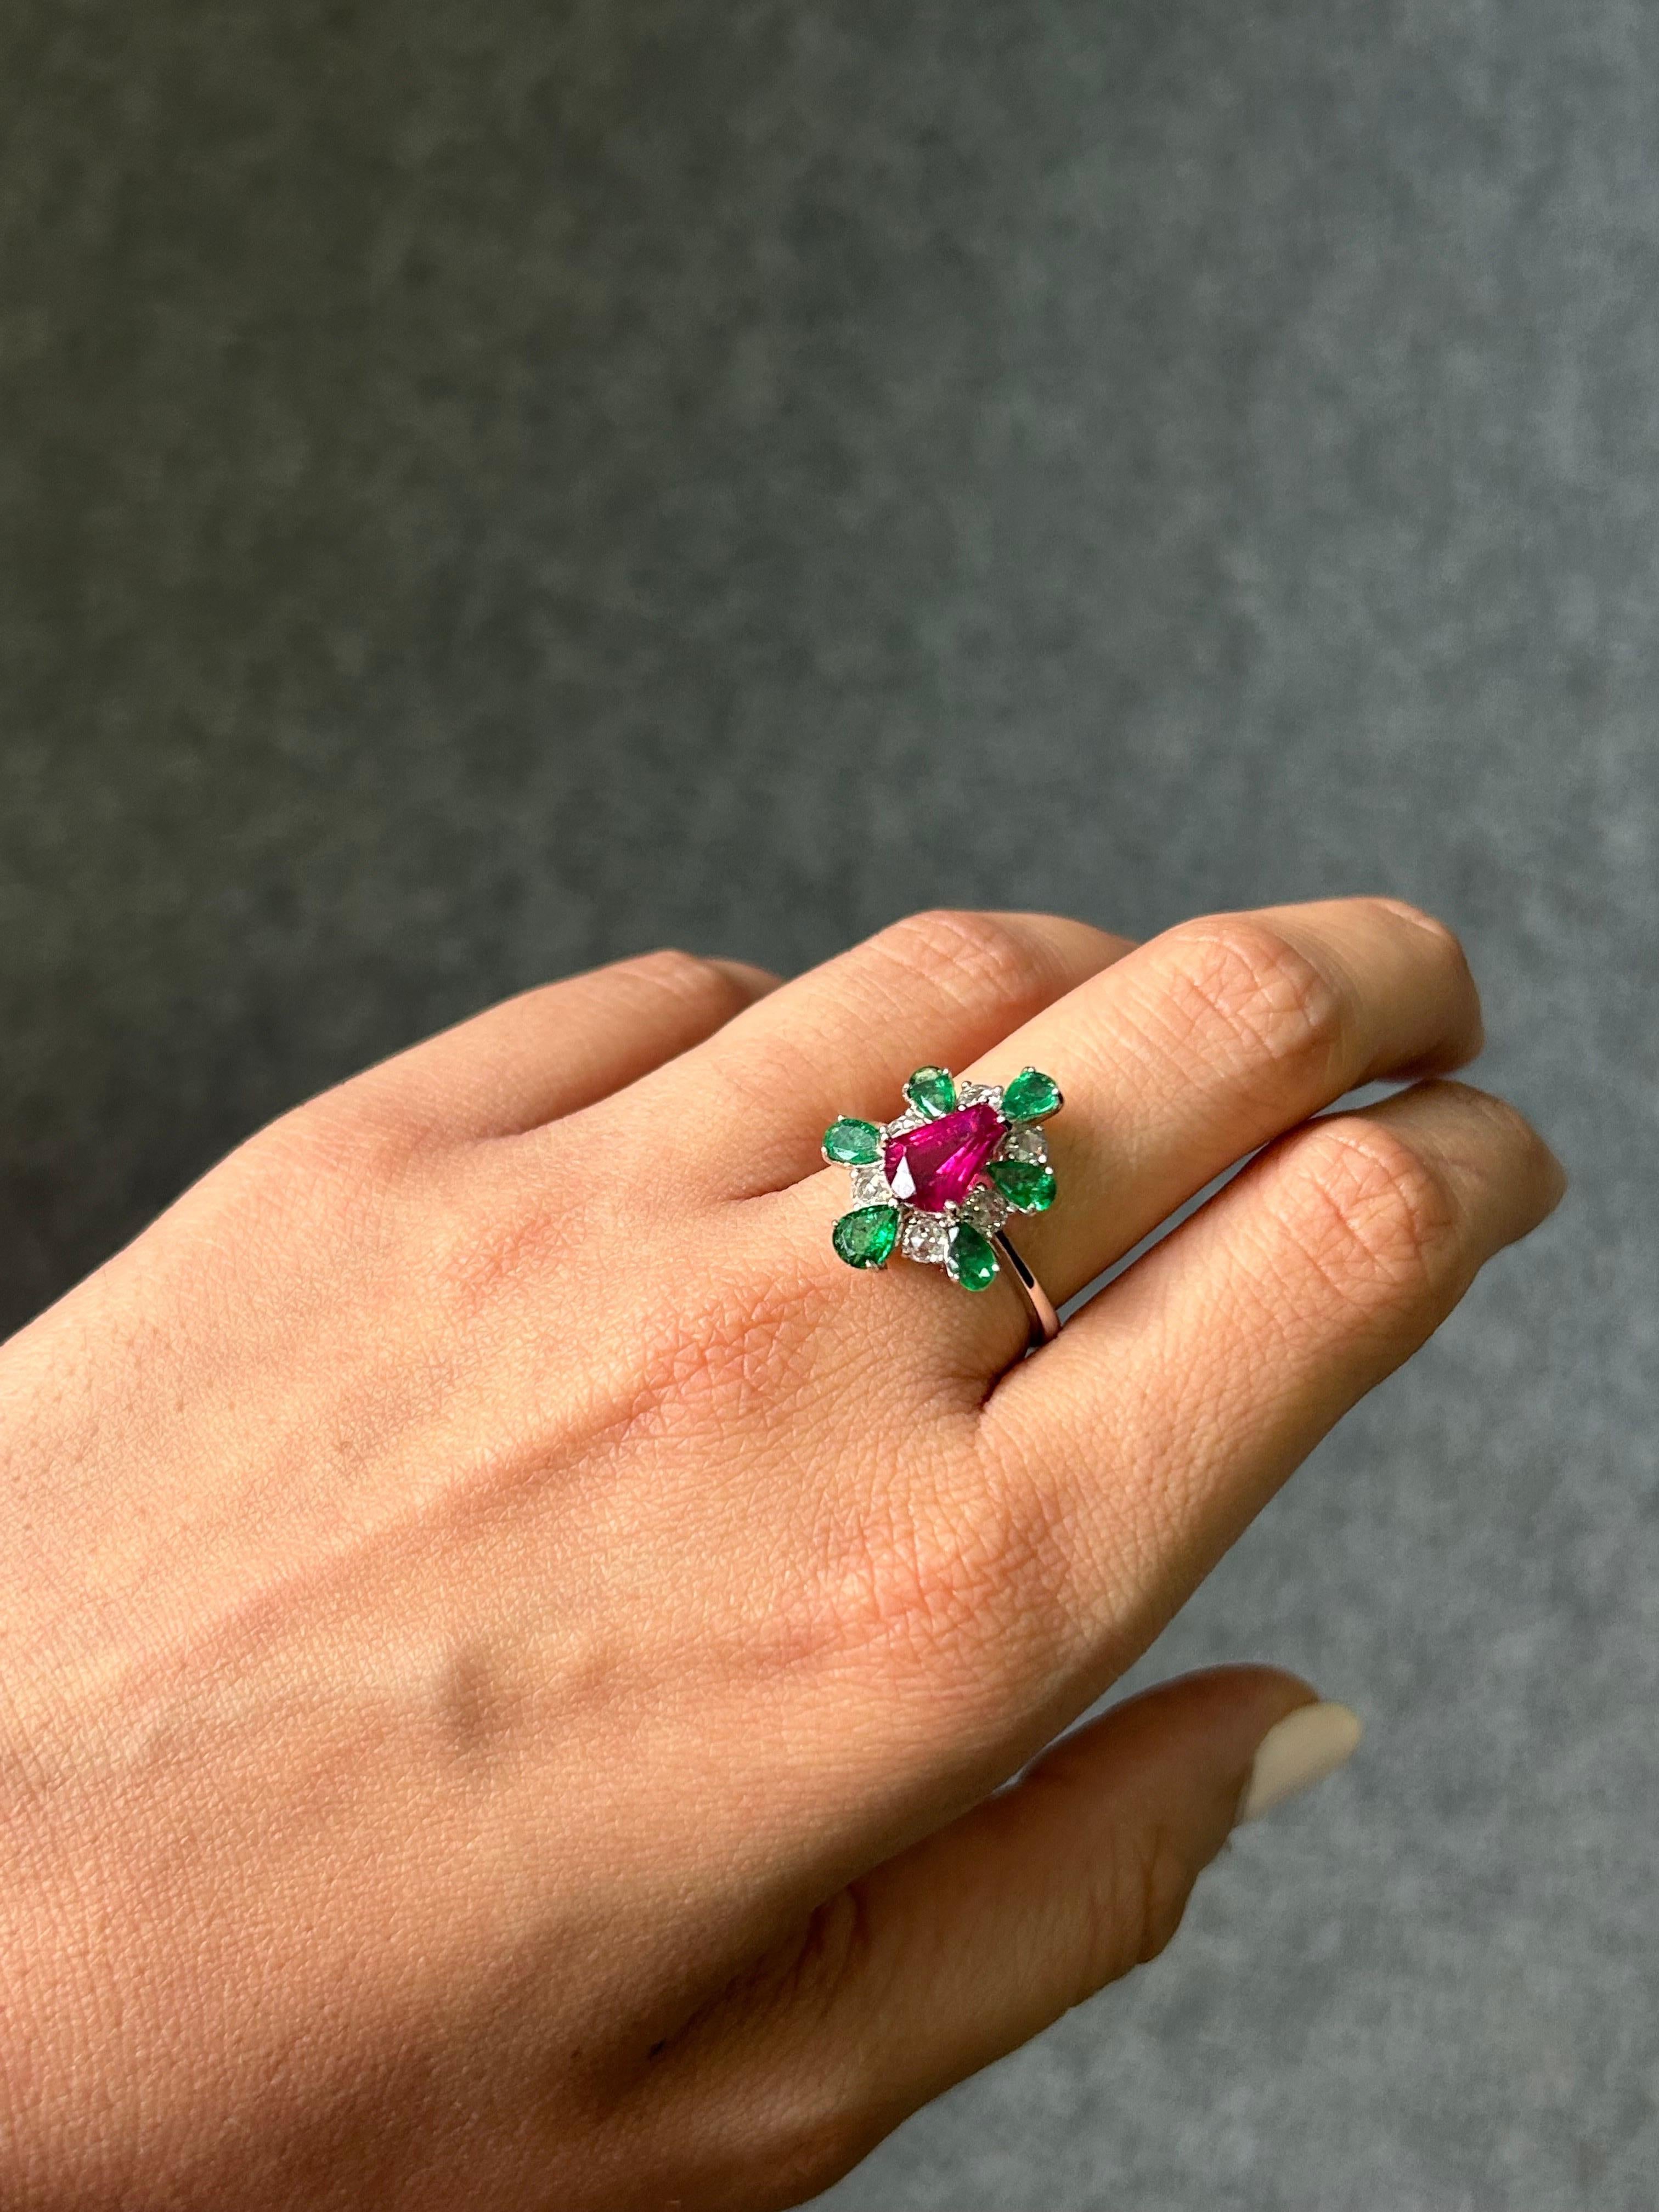 One of a kind, fancy shaped certified no heat Mozambique Ruby ring, adorned with pear shape Zambian Emeralds and rose-cut Diamonds, set in 18K White Gold. The beautiful pink/red hue of the Ruby complements the vivid green of the Emeralds, making it